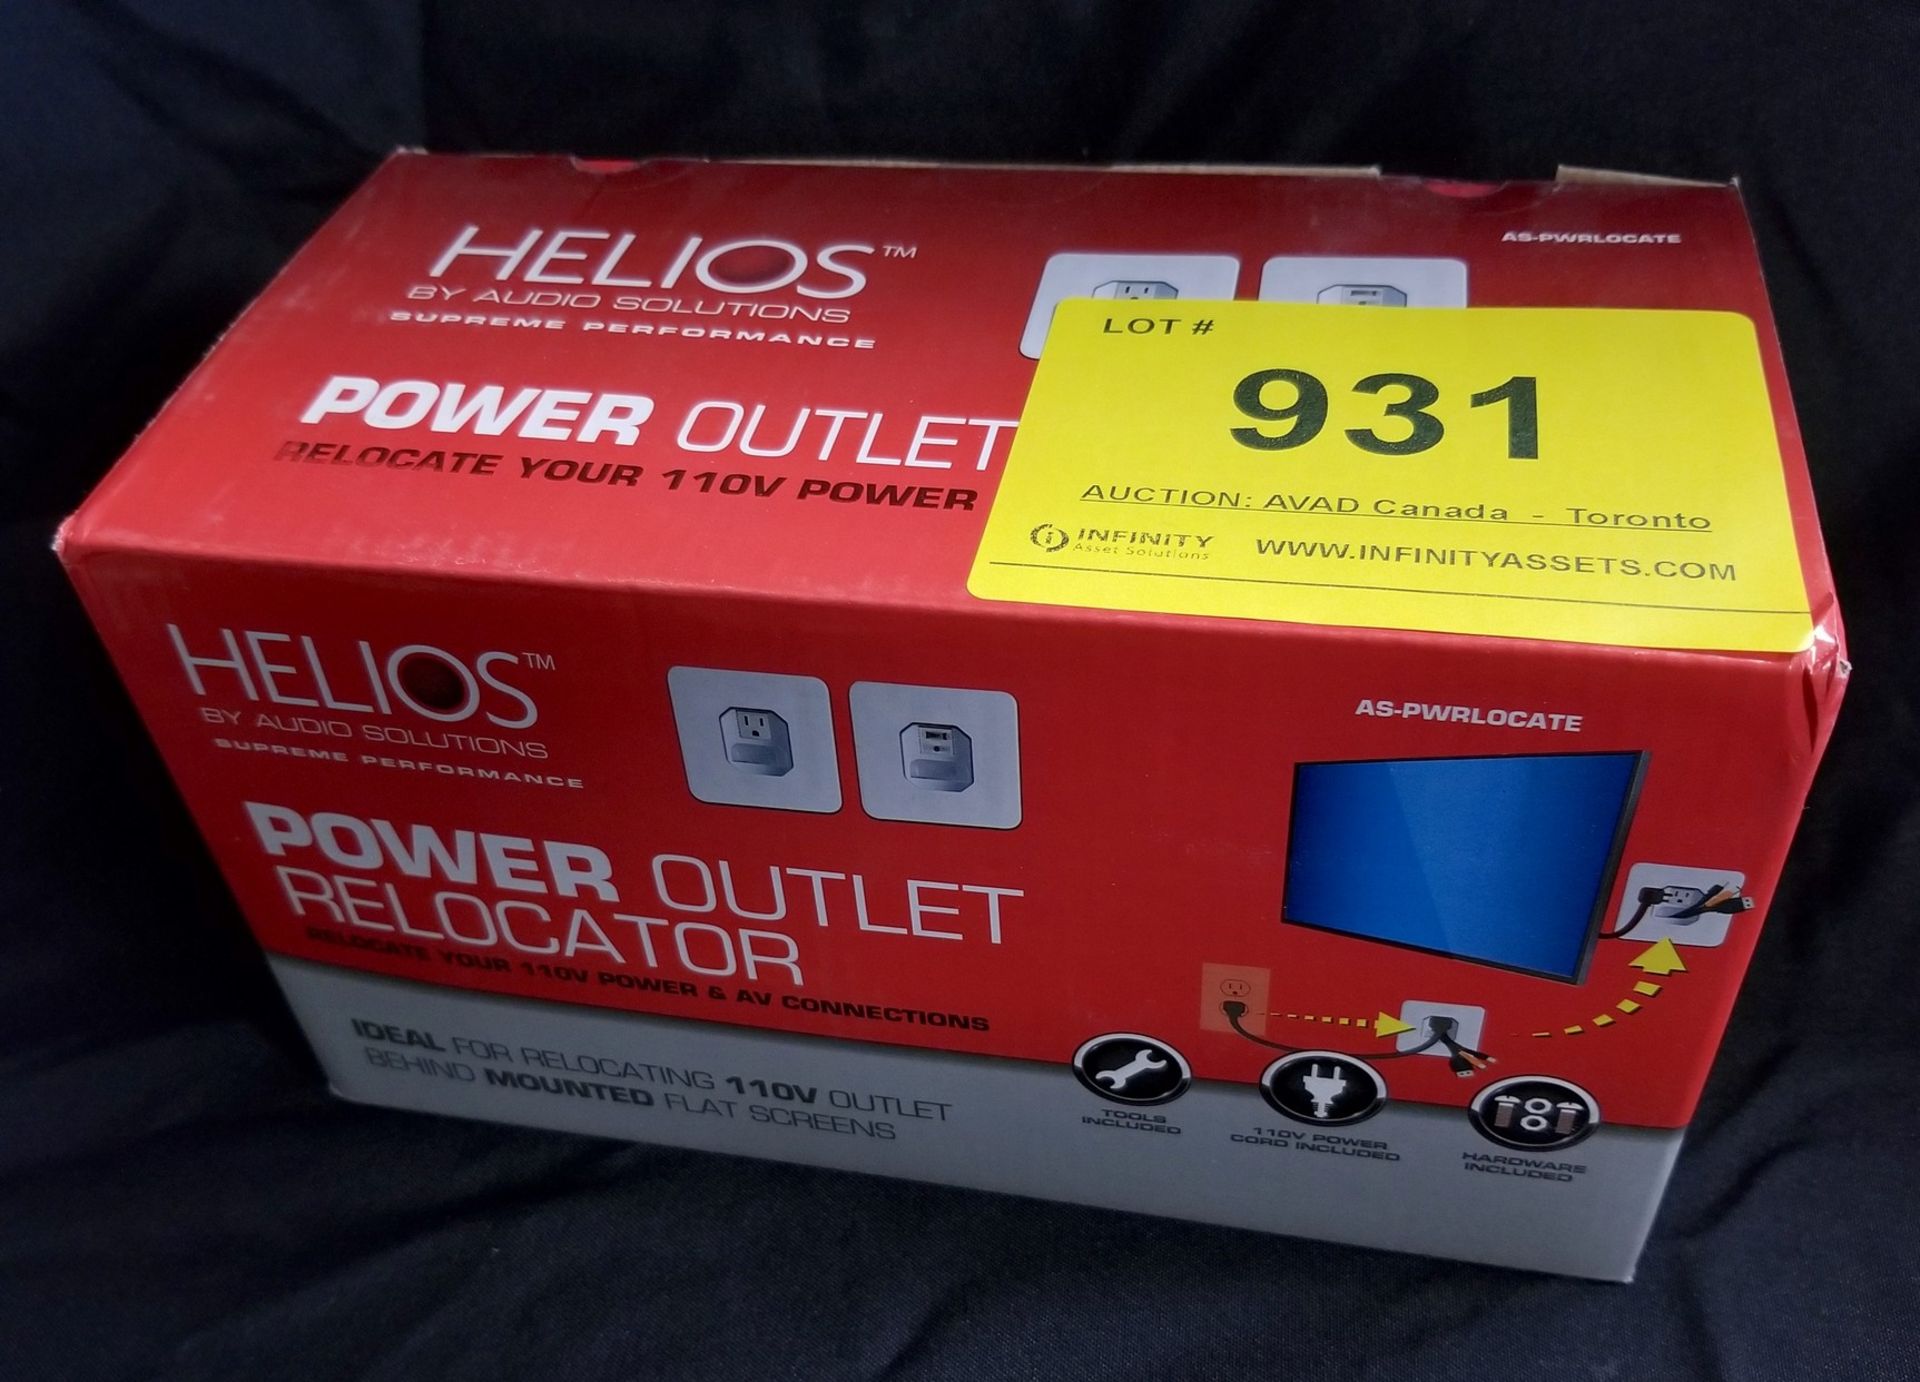 HELIOS, AS-PWRLOCATE POWER OUTLET RELOCATOR - (BNIB)